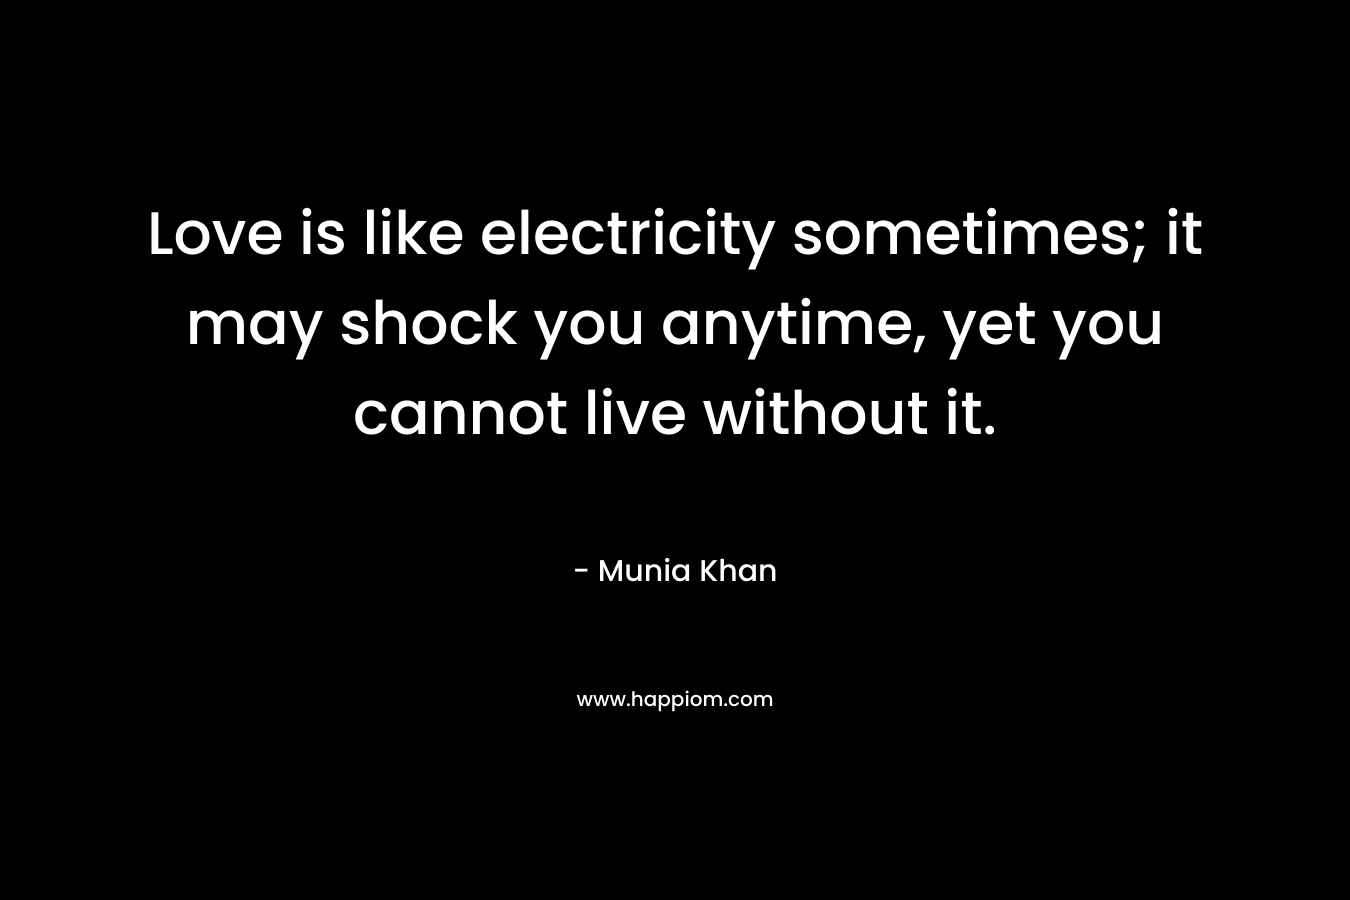 Love is like electricity sometimes; it may shock you anytime, yet you cannot live without it.